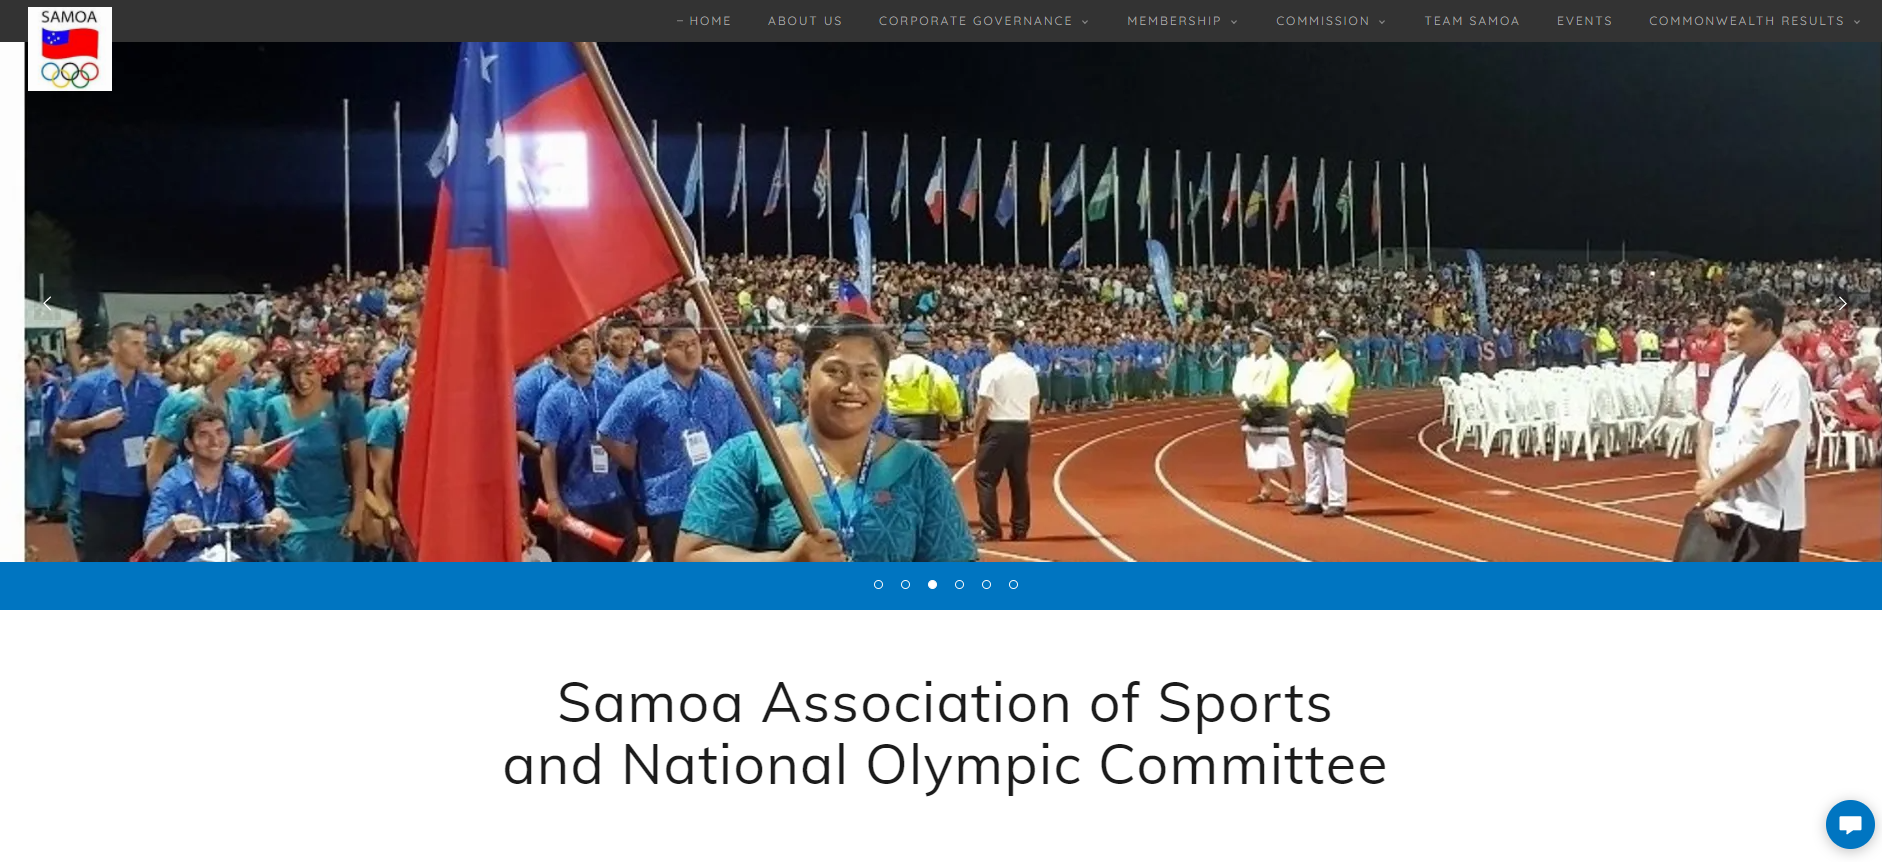 Samoa Association of Sports and National Olympic Committee launch new website